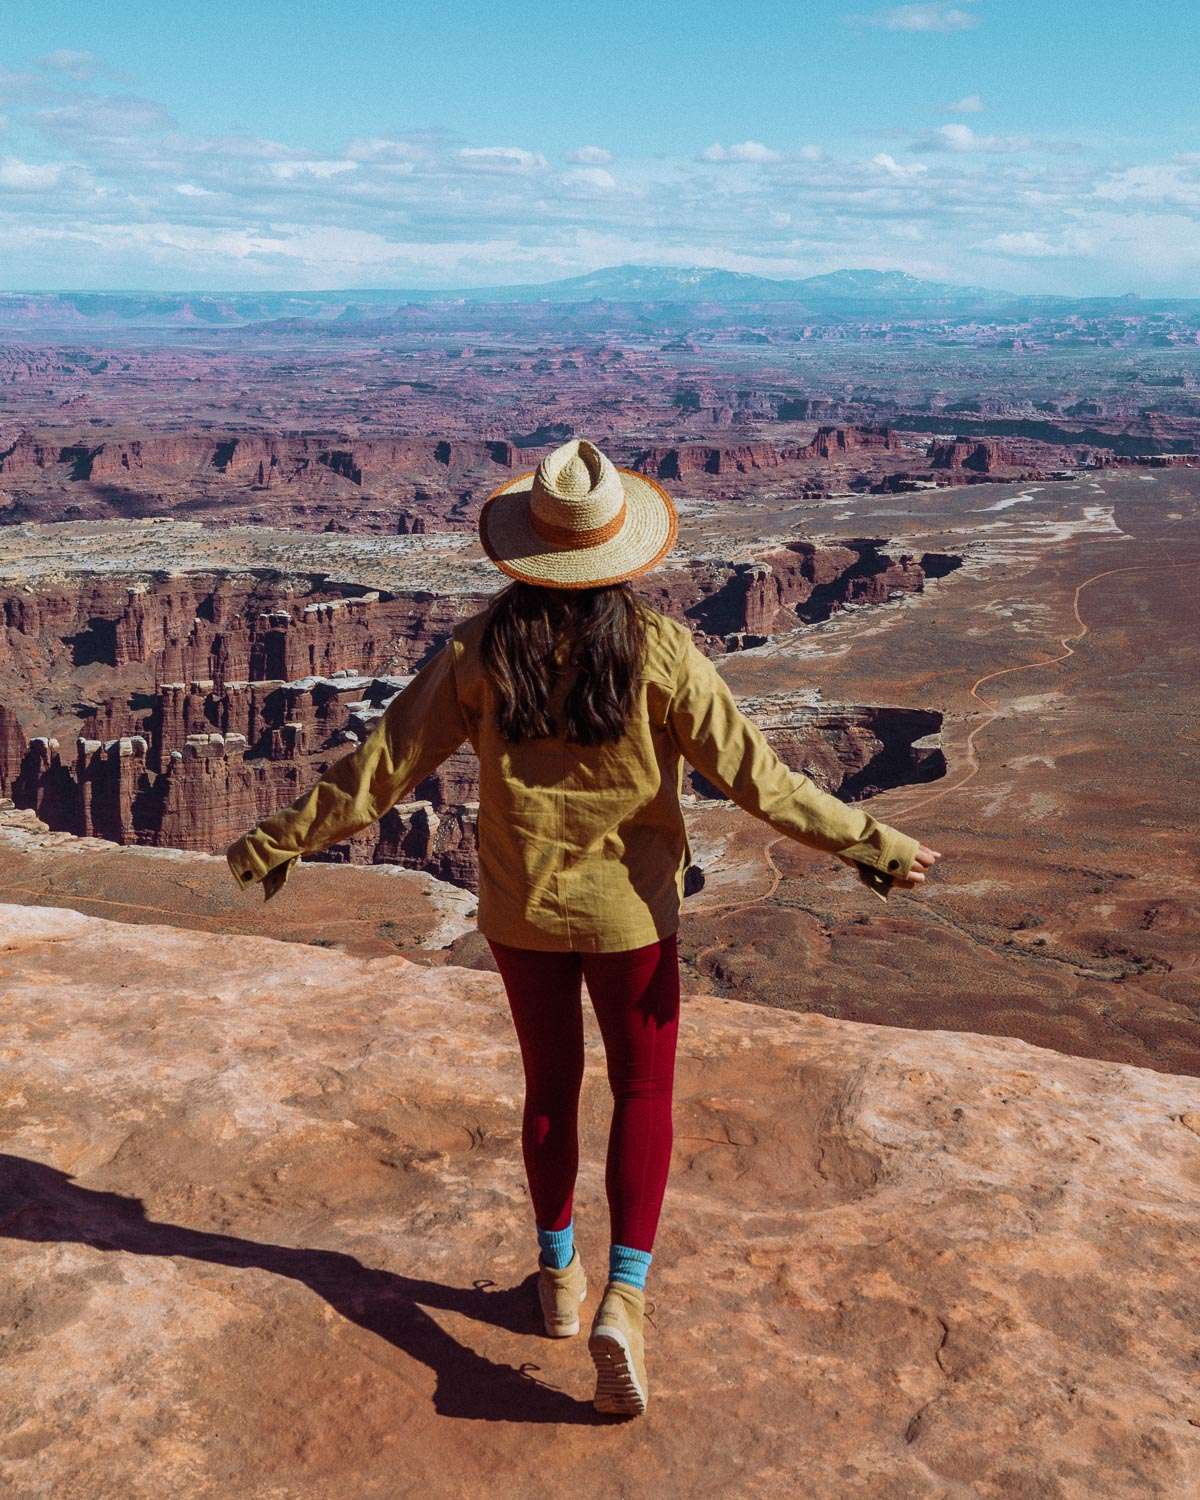 Rachel Off Duty: A Woman in a Khaki Jacket and Red Yoga Pants Admires the View at Canyonlands